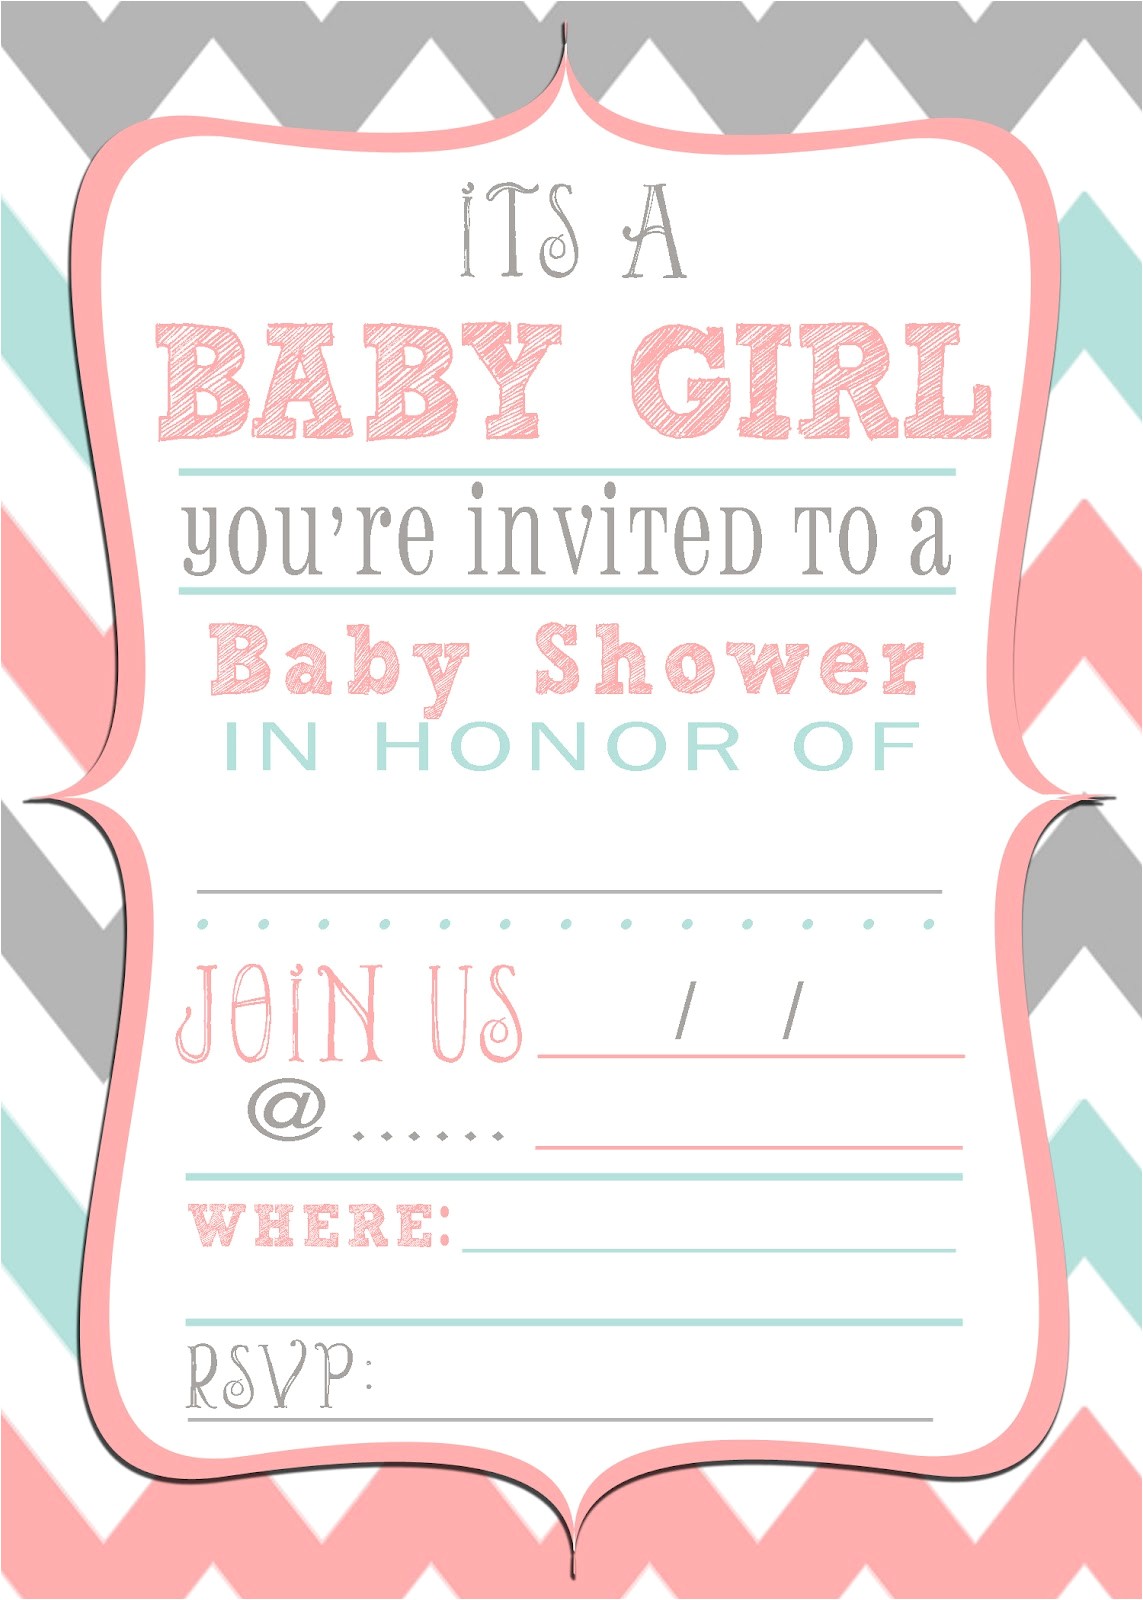 Free Baby Shower Invites Downloads Mrs This and that Baby Shower Banner Free Downloads